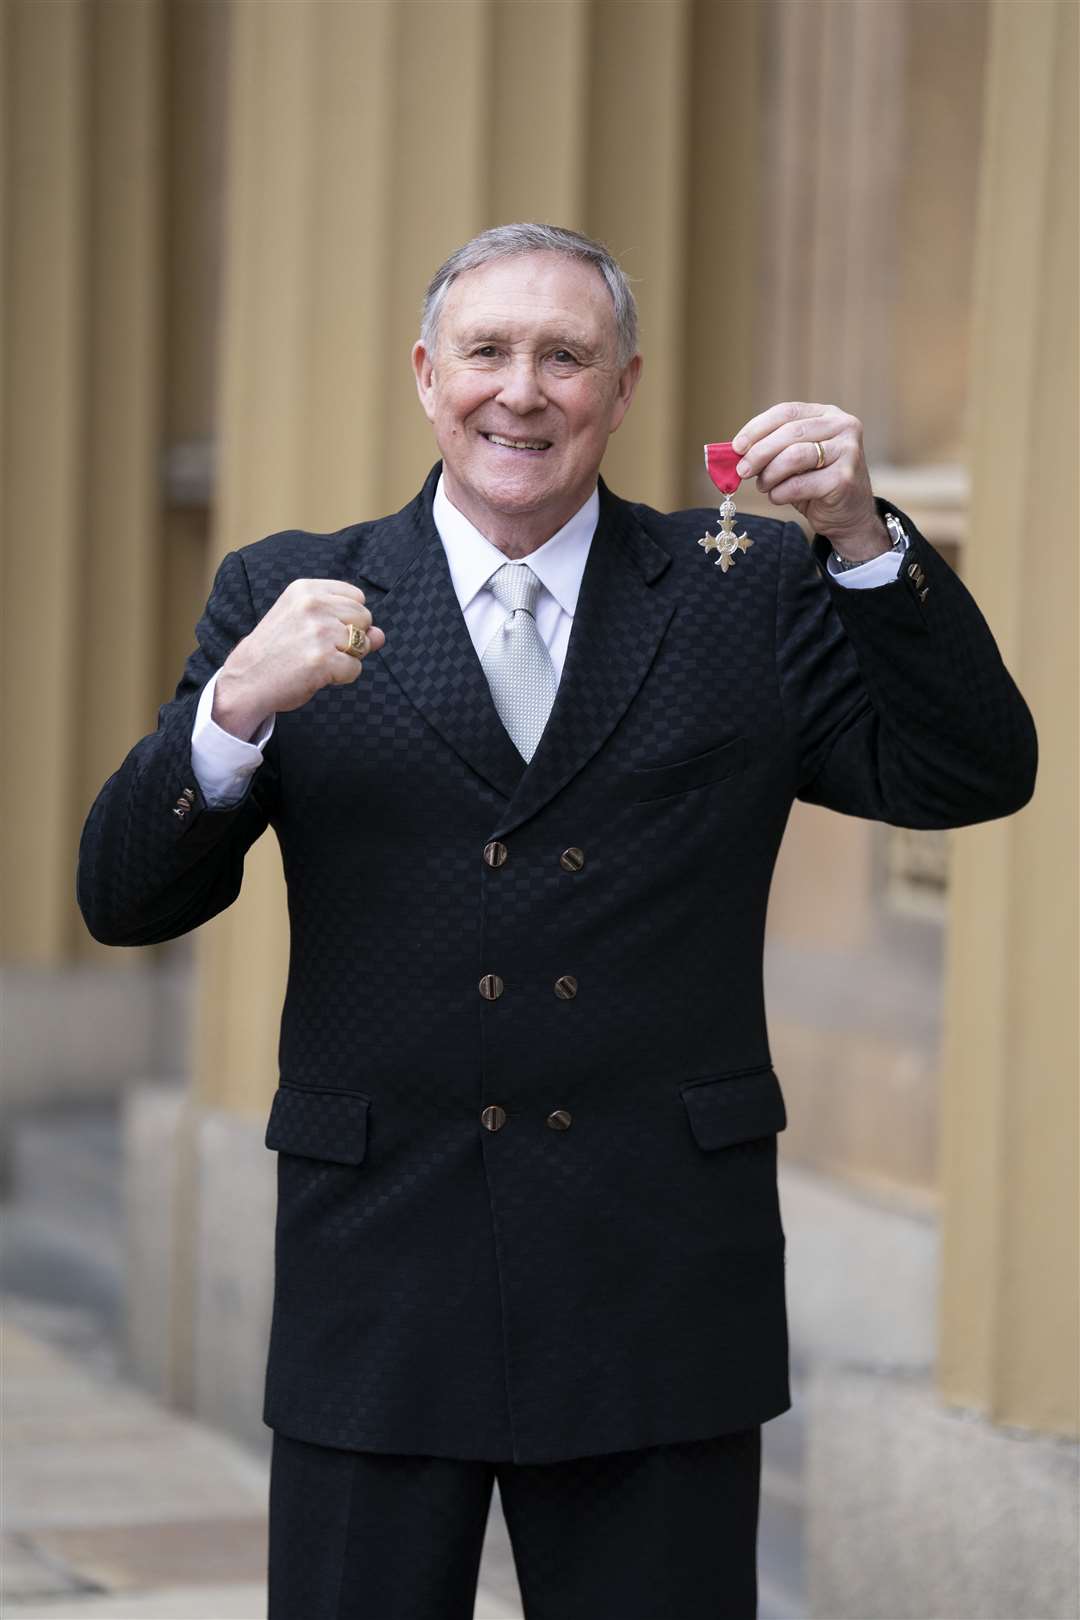 John H Stracey was also made an MBE at the ceremony (Kirsty O’Connor/PA)